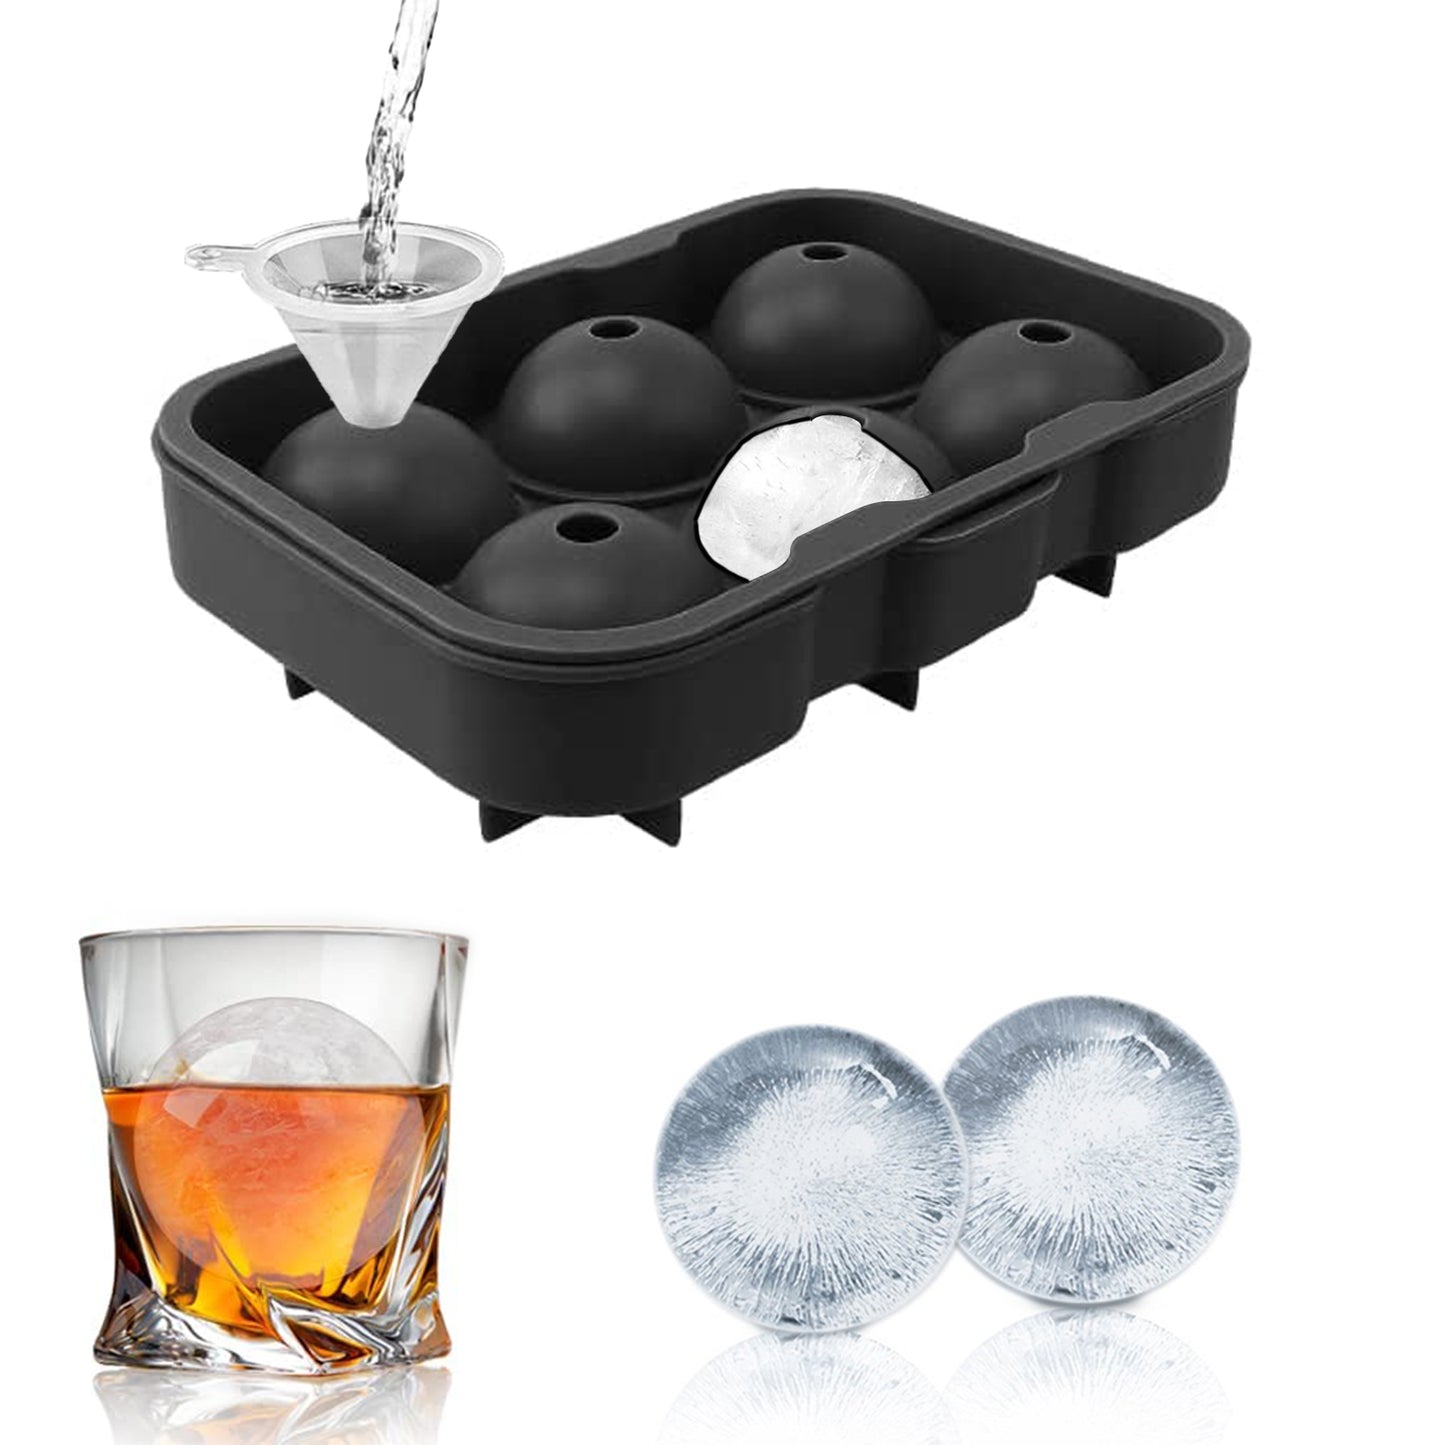 Silicone Ice Mold Maker ( Pack of 2)